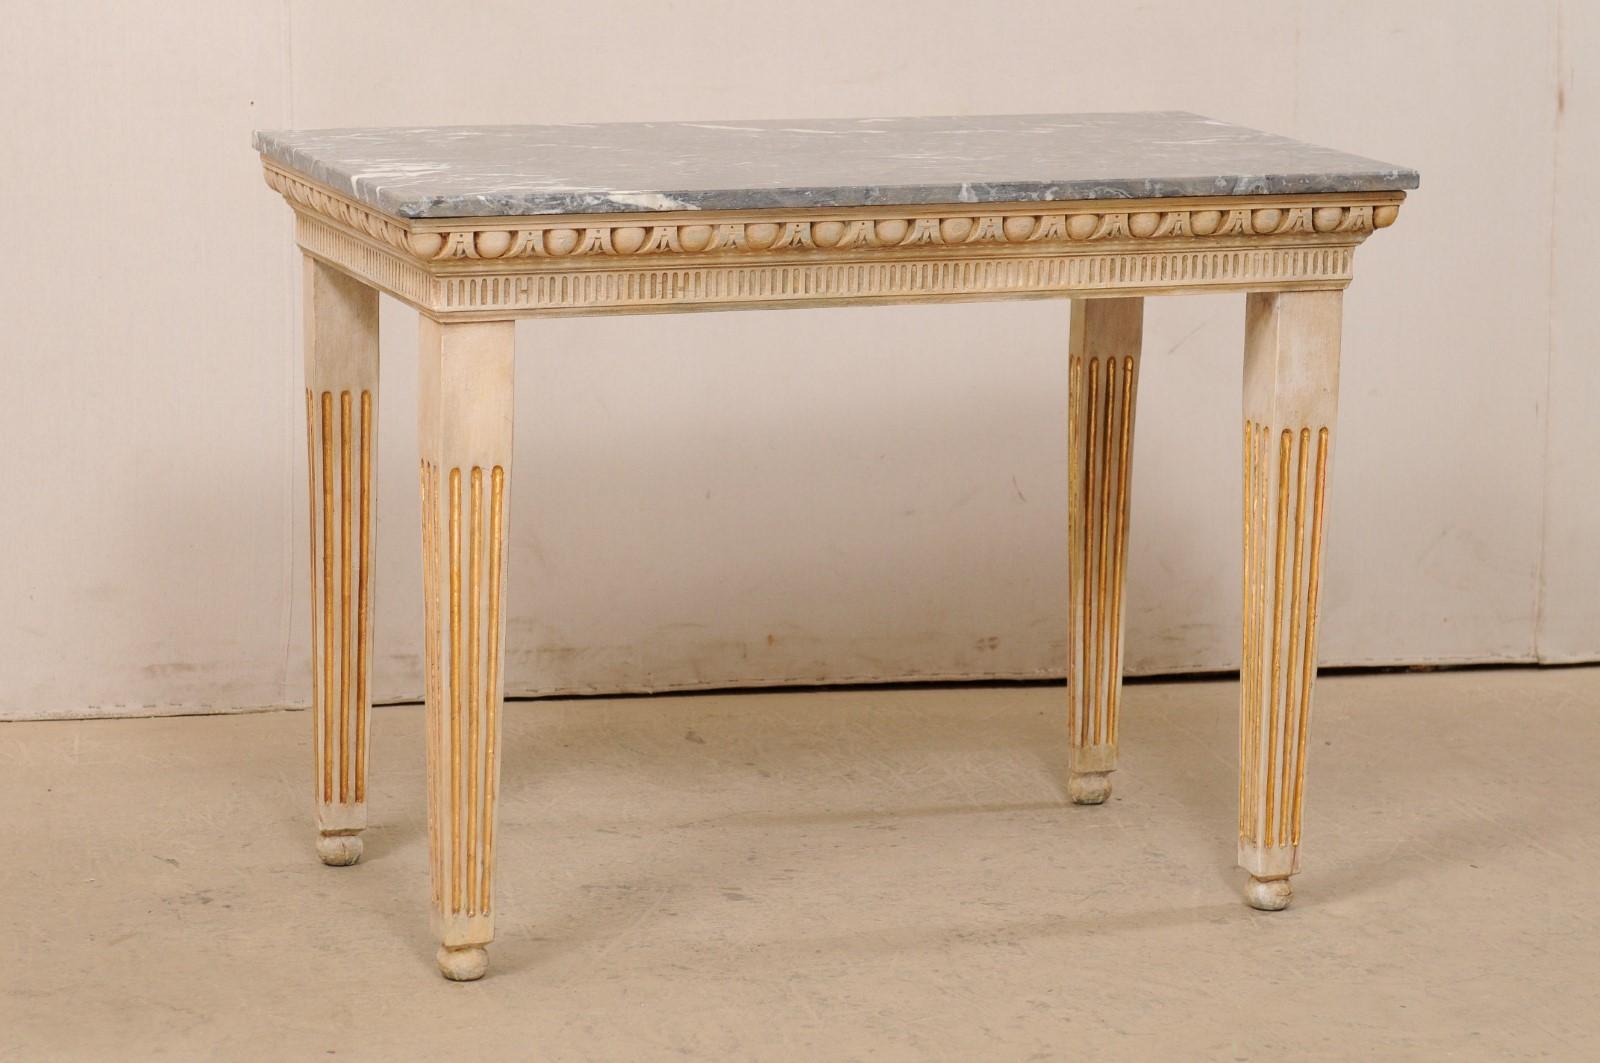 An Italian-style wood-carved console table with marble top. This vintage American table has been designed in an Italian style, featuring a rectangular-shaped marble top which rests upon a carved apron in egg-and-dart trim at top, with fluted trim at